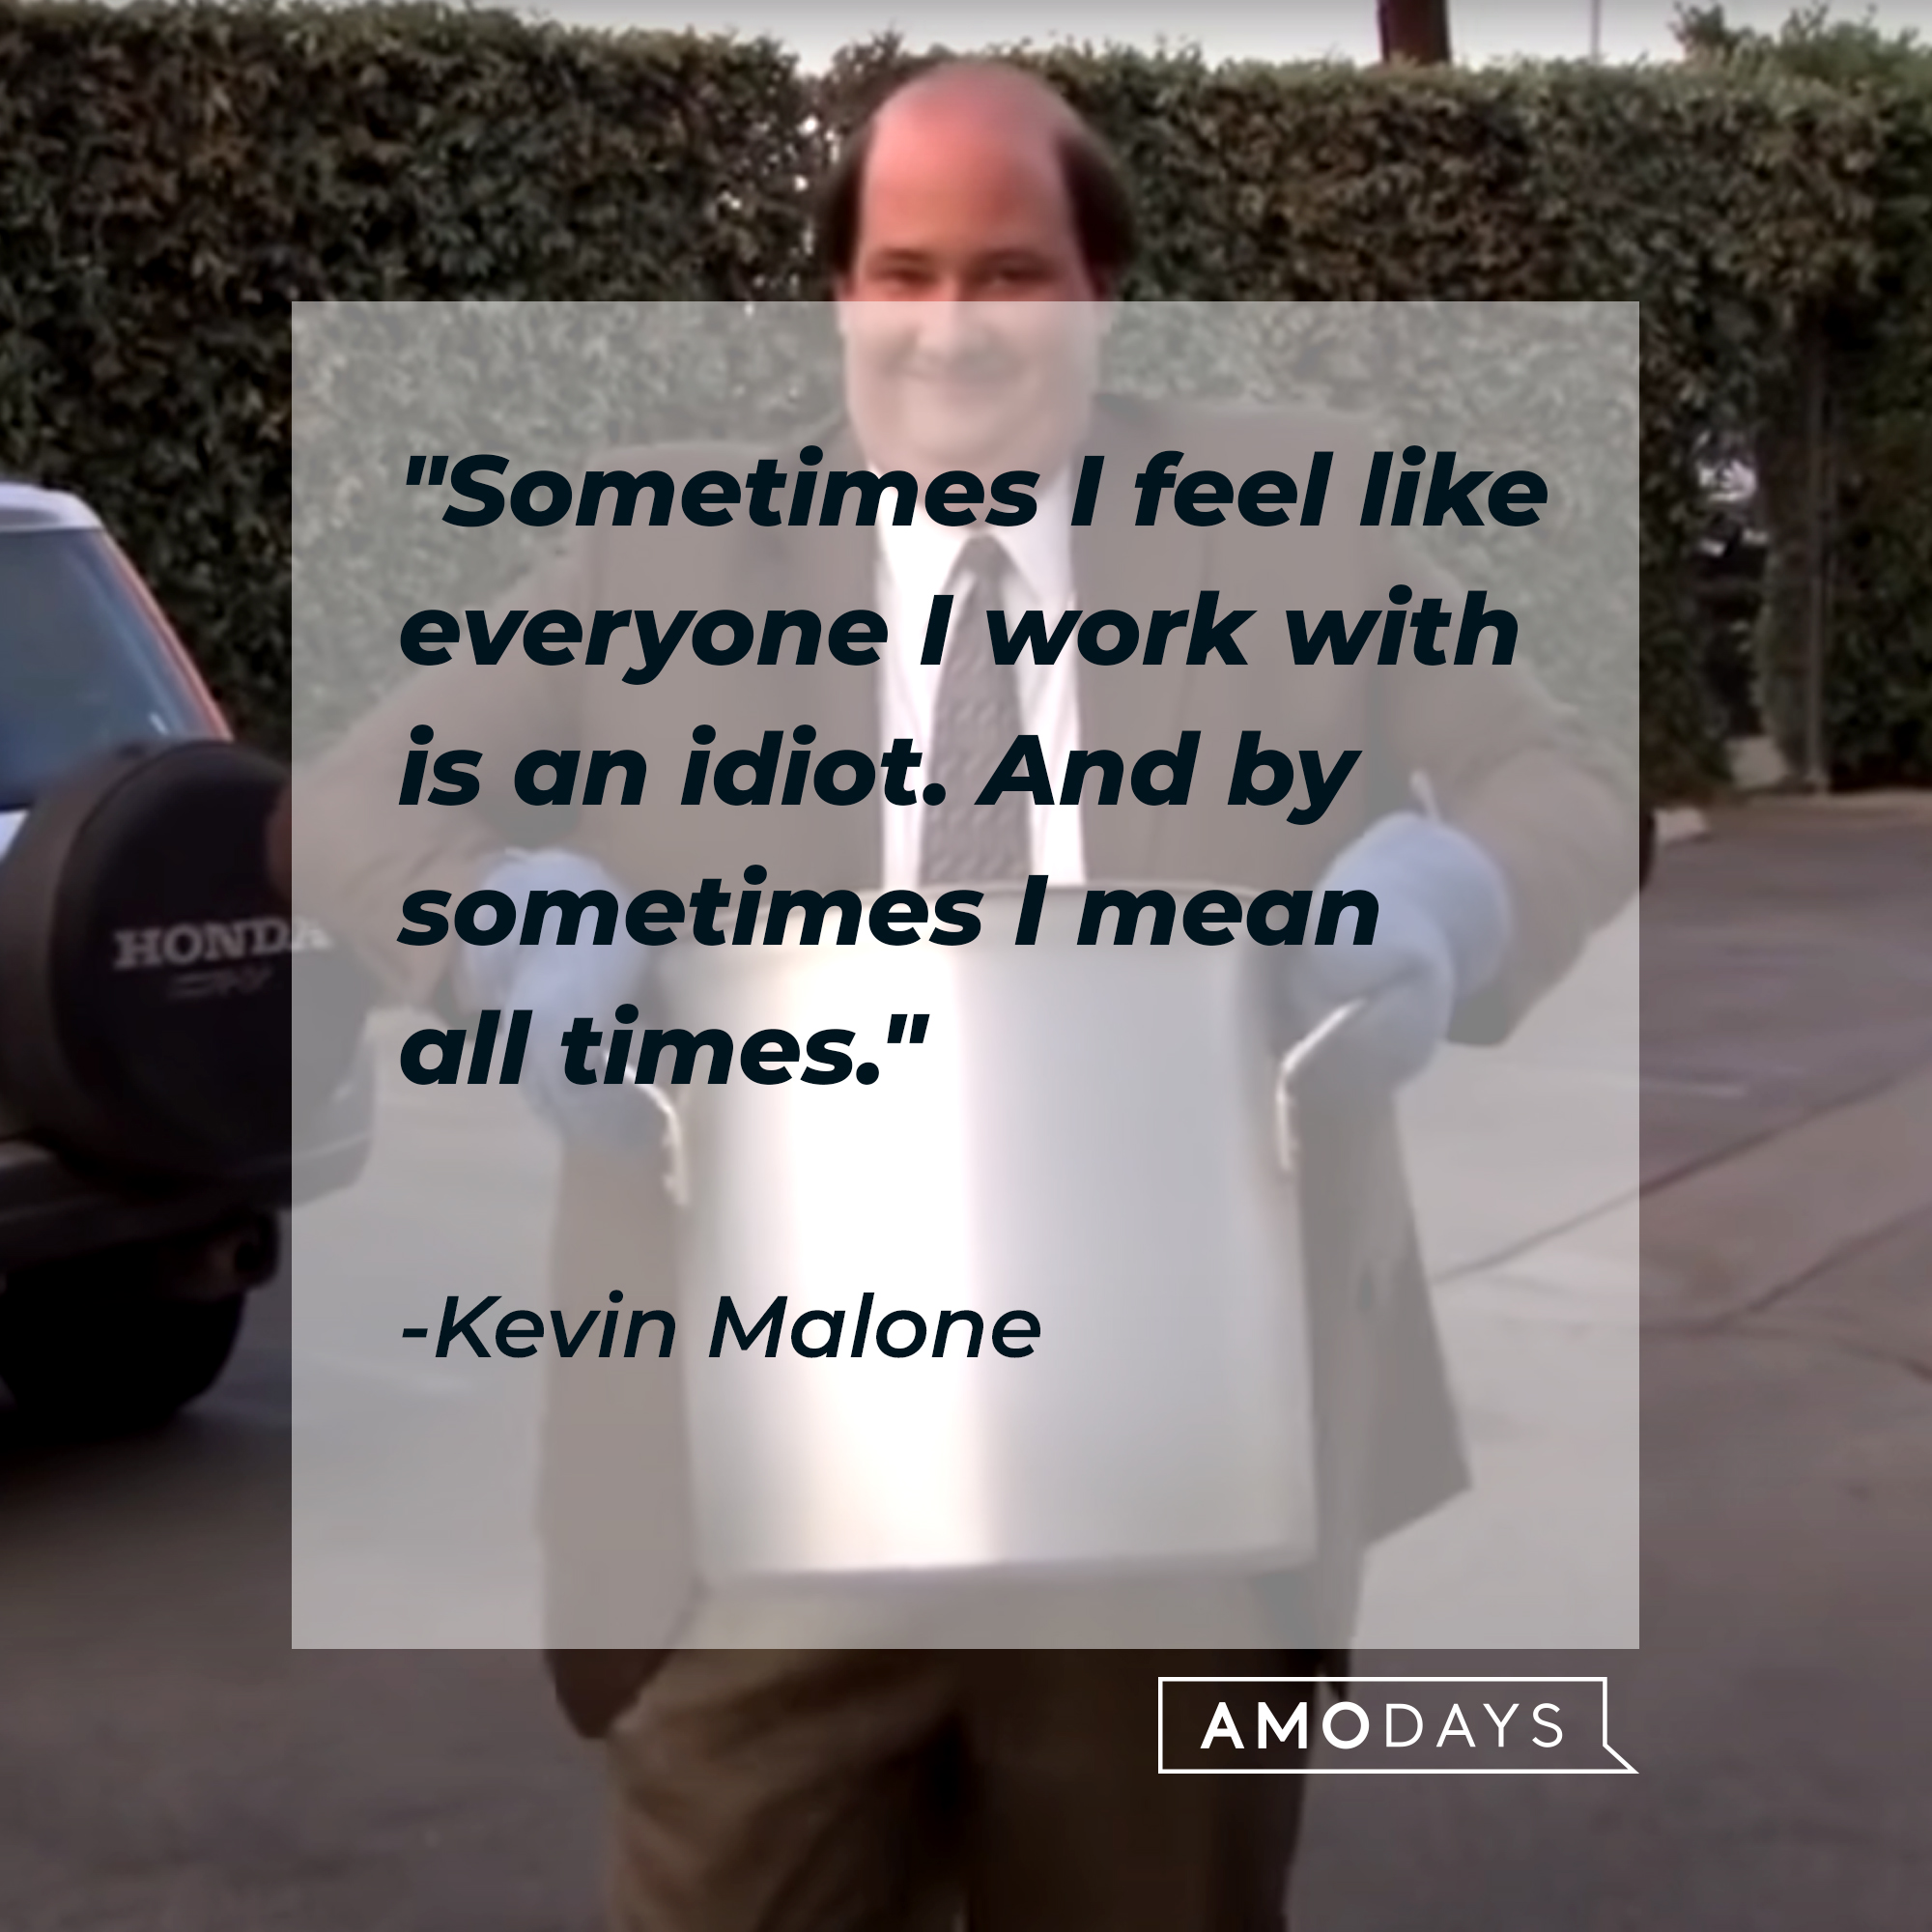 Kevin Malone's quote: "Sometimes I feel like everyone I work with is an idiot. And by sometimes I mean all times." | Source:  youtube.com/TheOffice